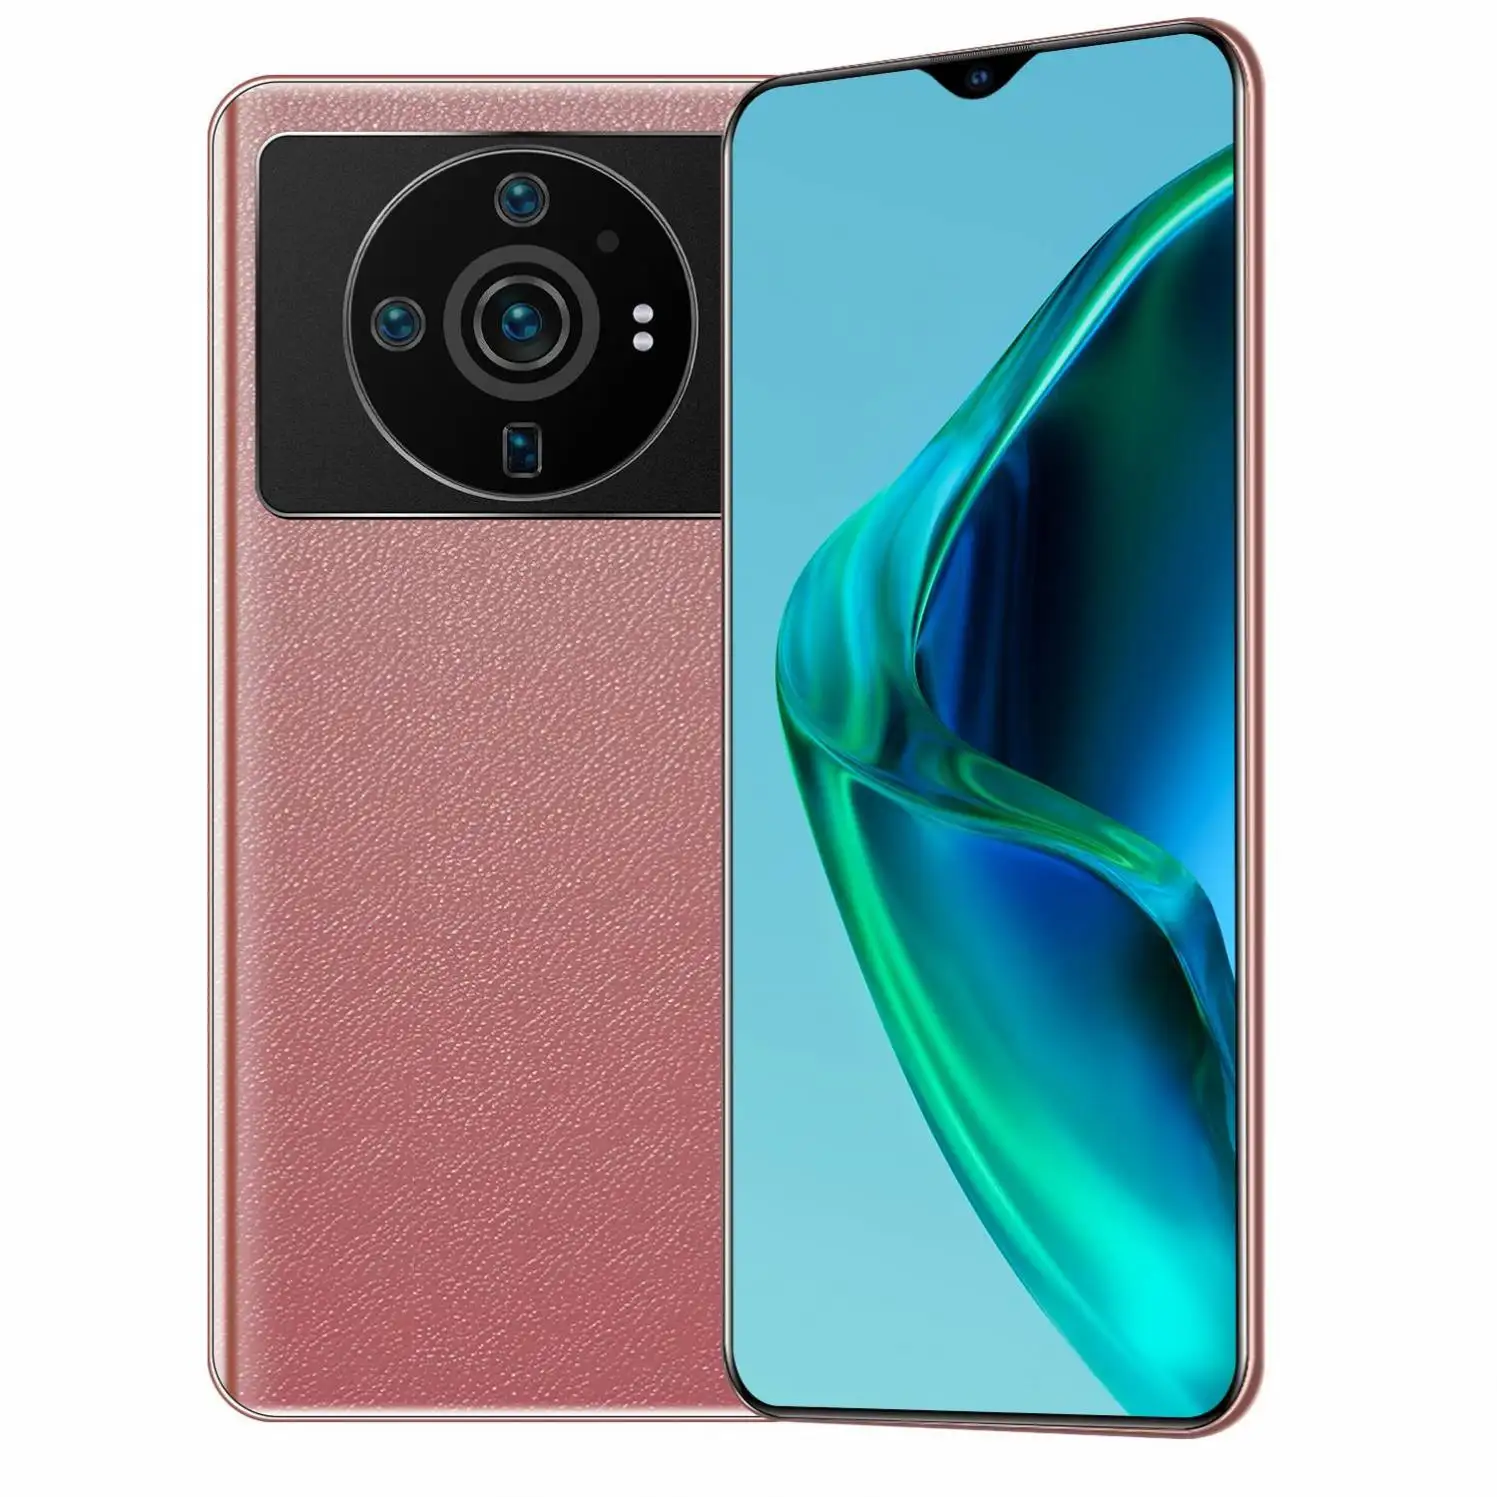 Rom OnePlus 9R 9 R 5G Smartphone 8GB 128 Snapdragon 870 Mobil Phone 120Hz AMOLED Display 65W Warp Support OTA and NFC